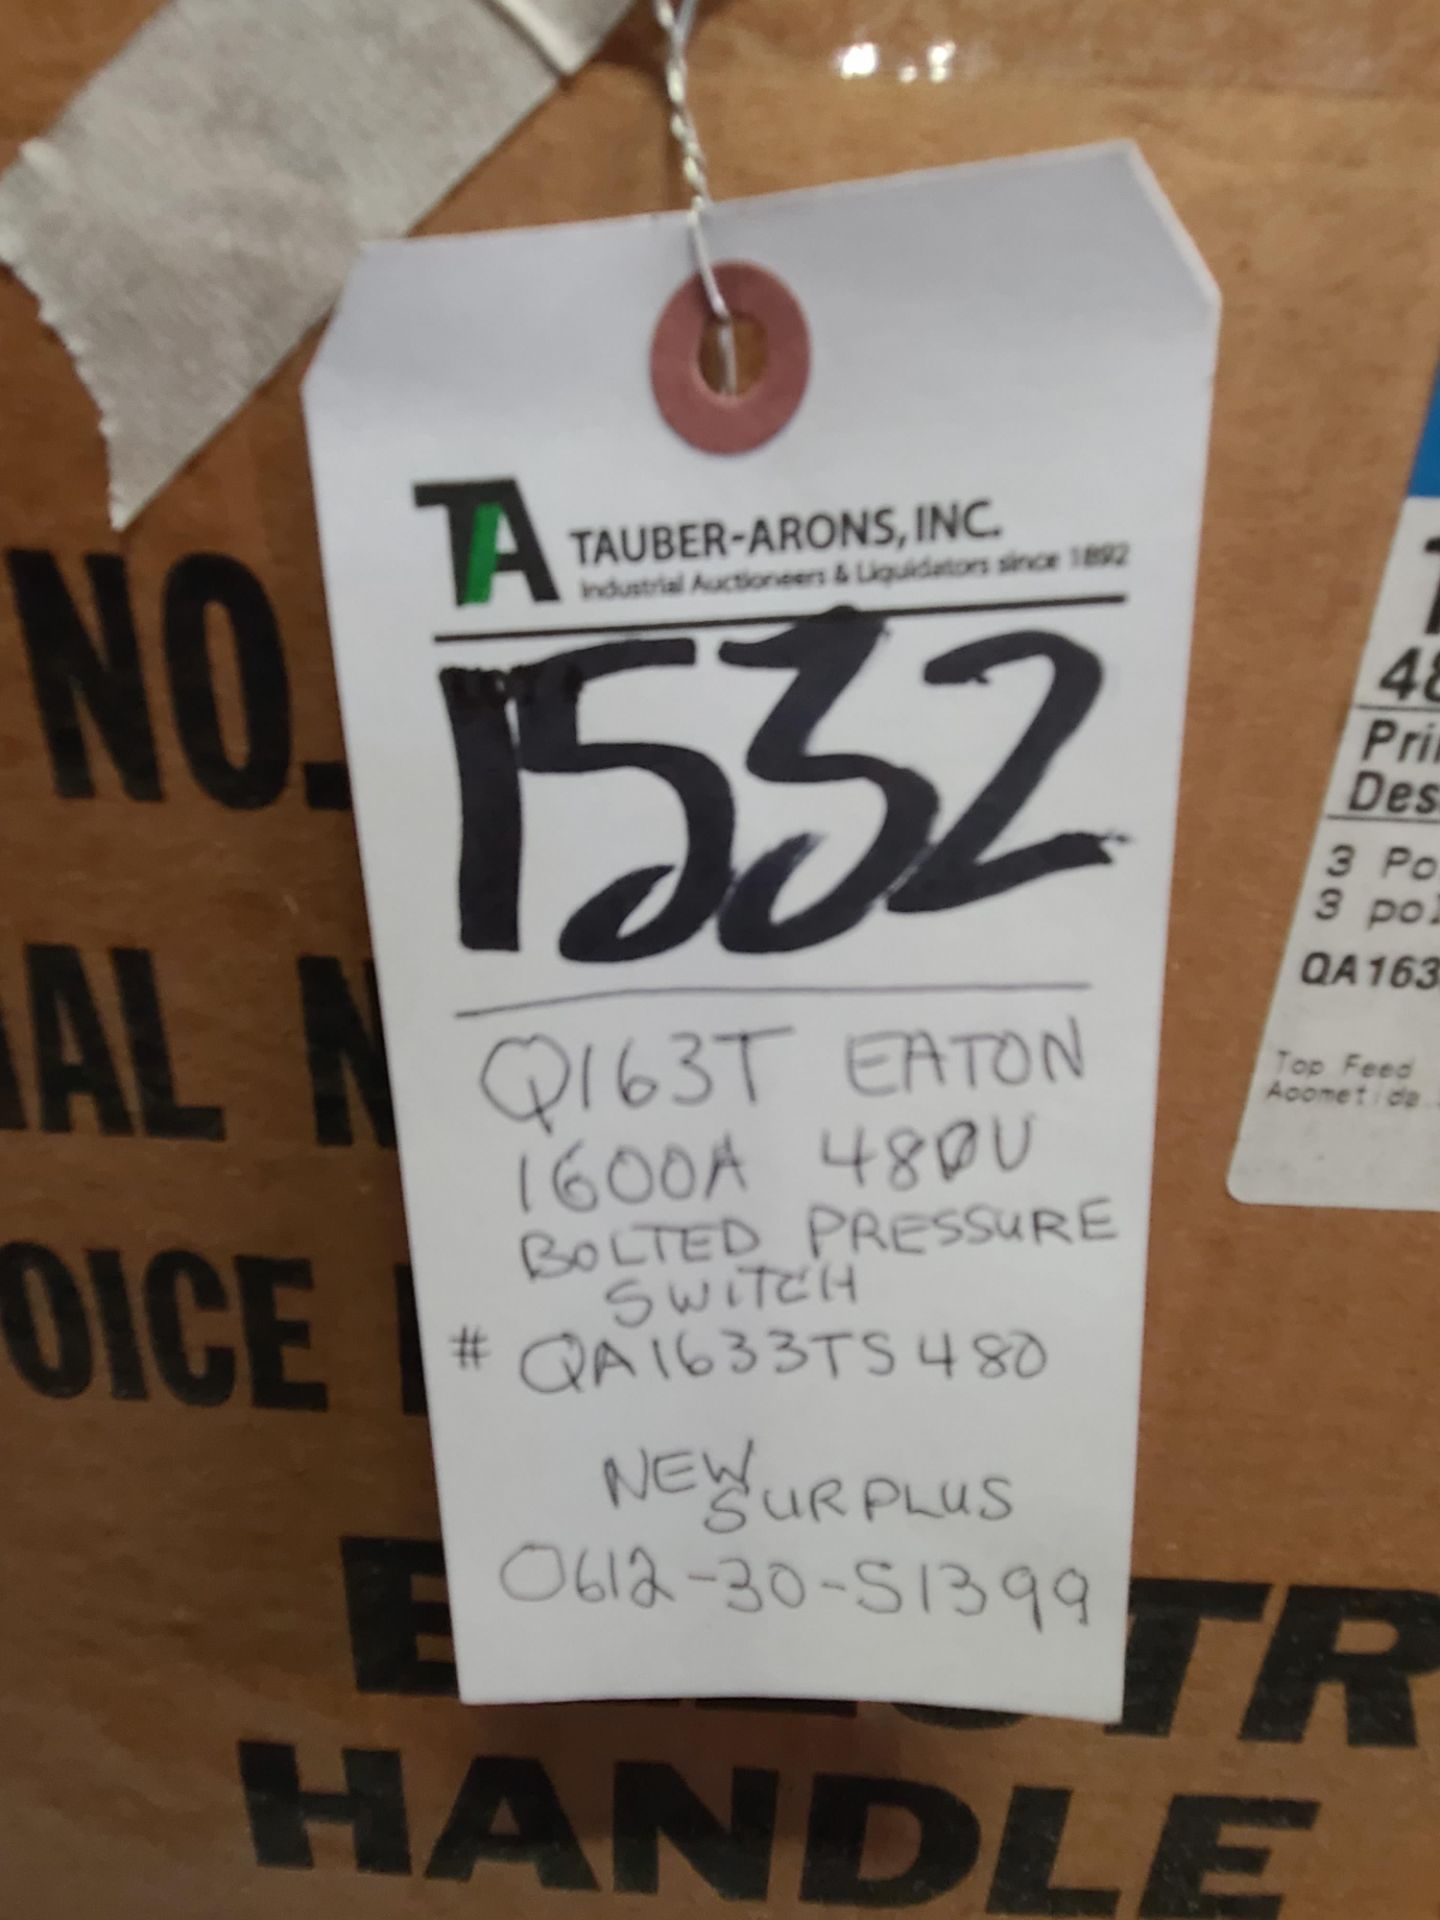 Eaton mod. Q163T Bolted Pressure Switch 1600A, 480V (LOADING FEES: $20) - Image 2 of 2